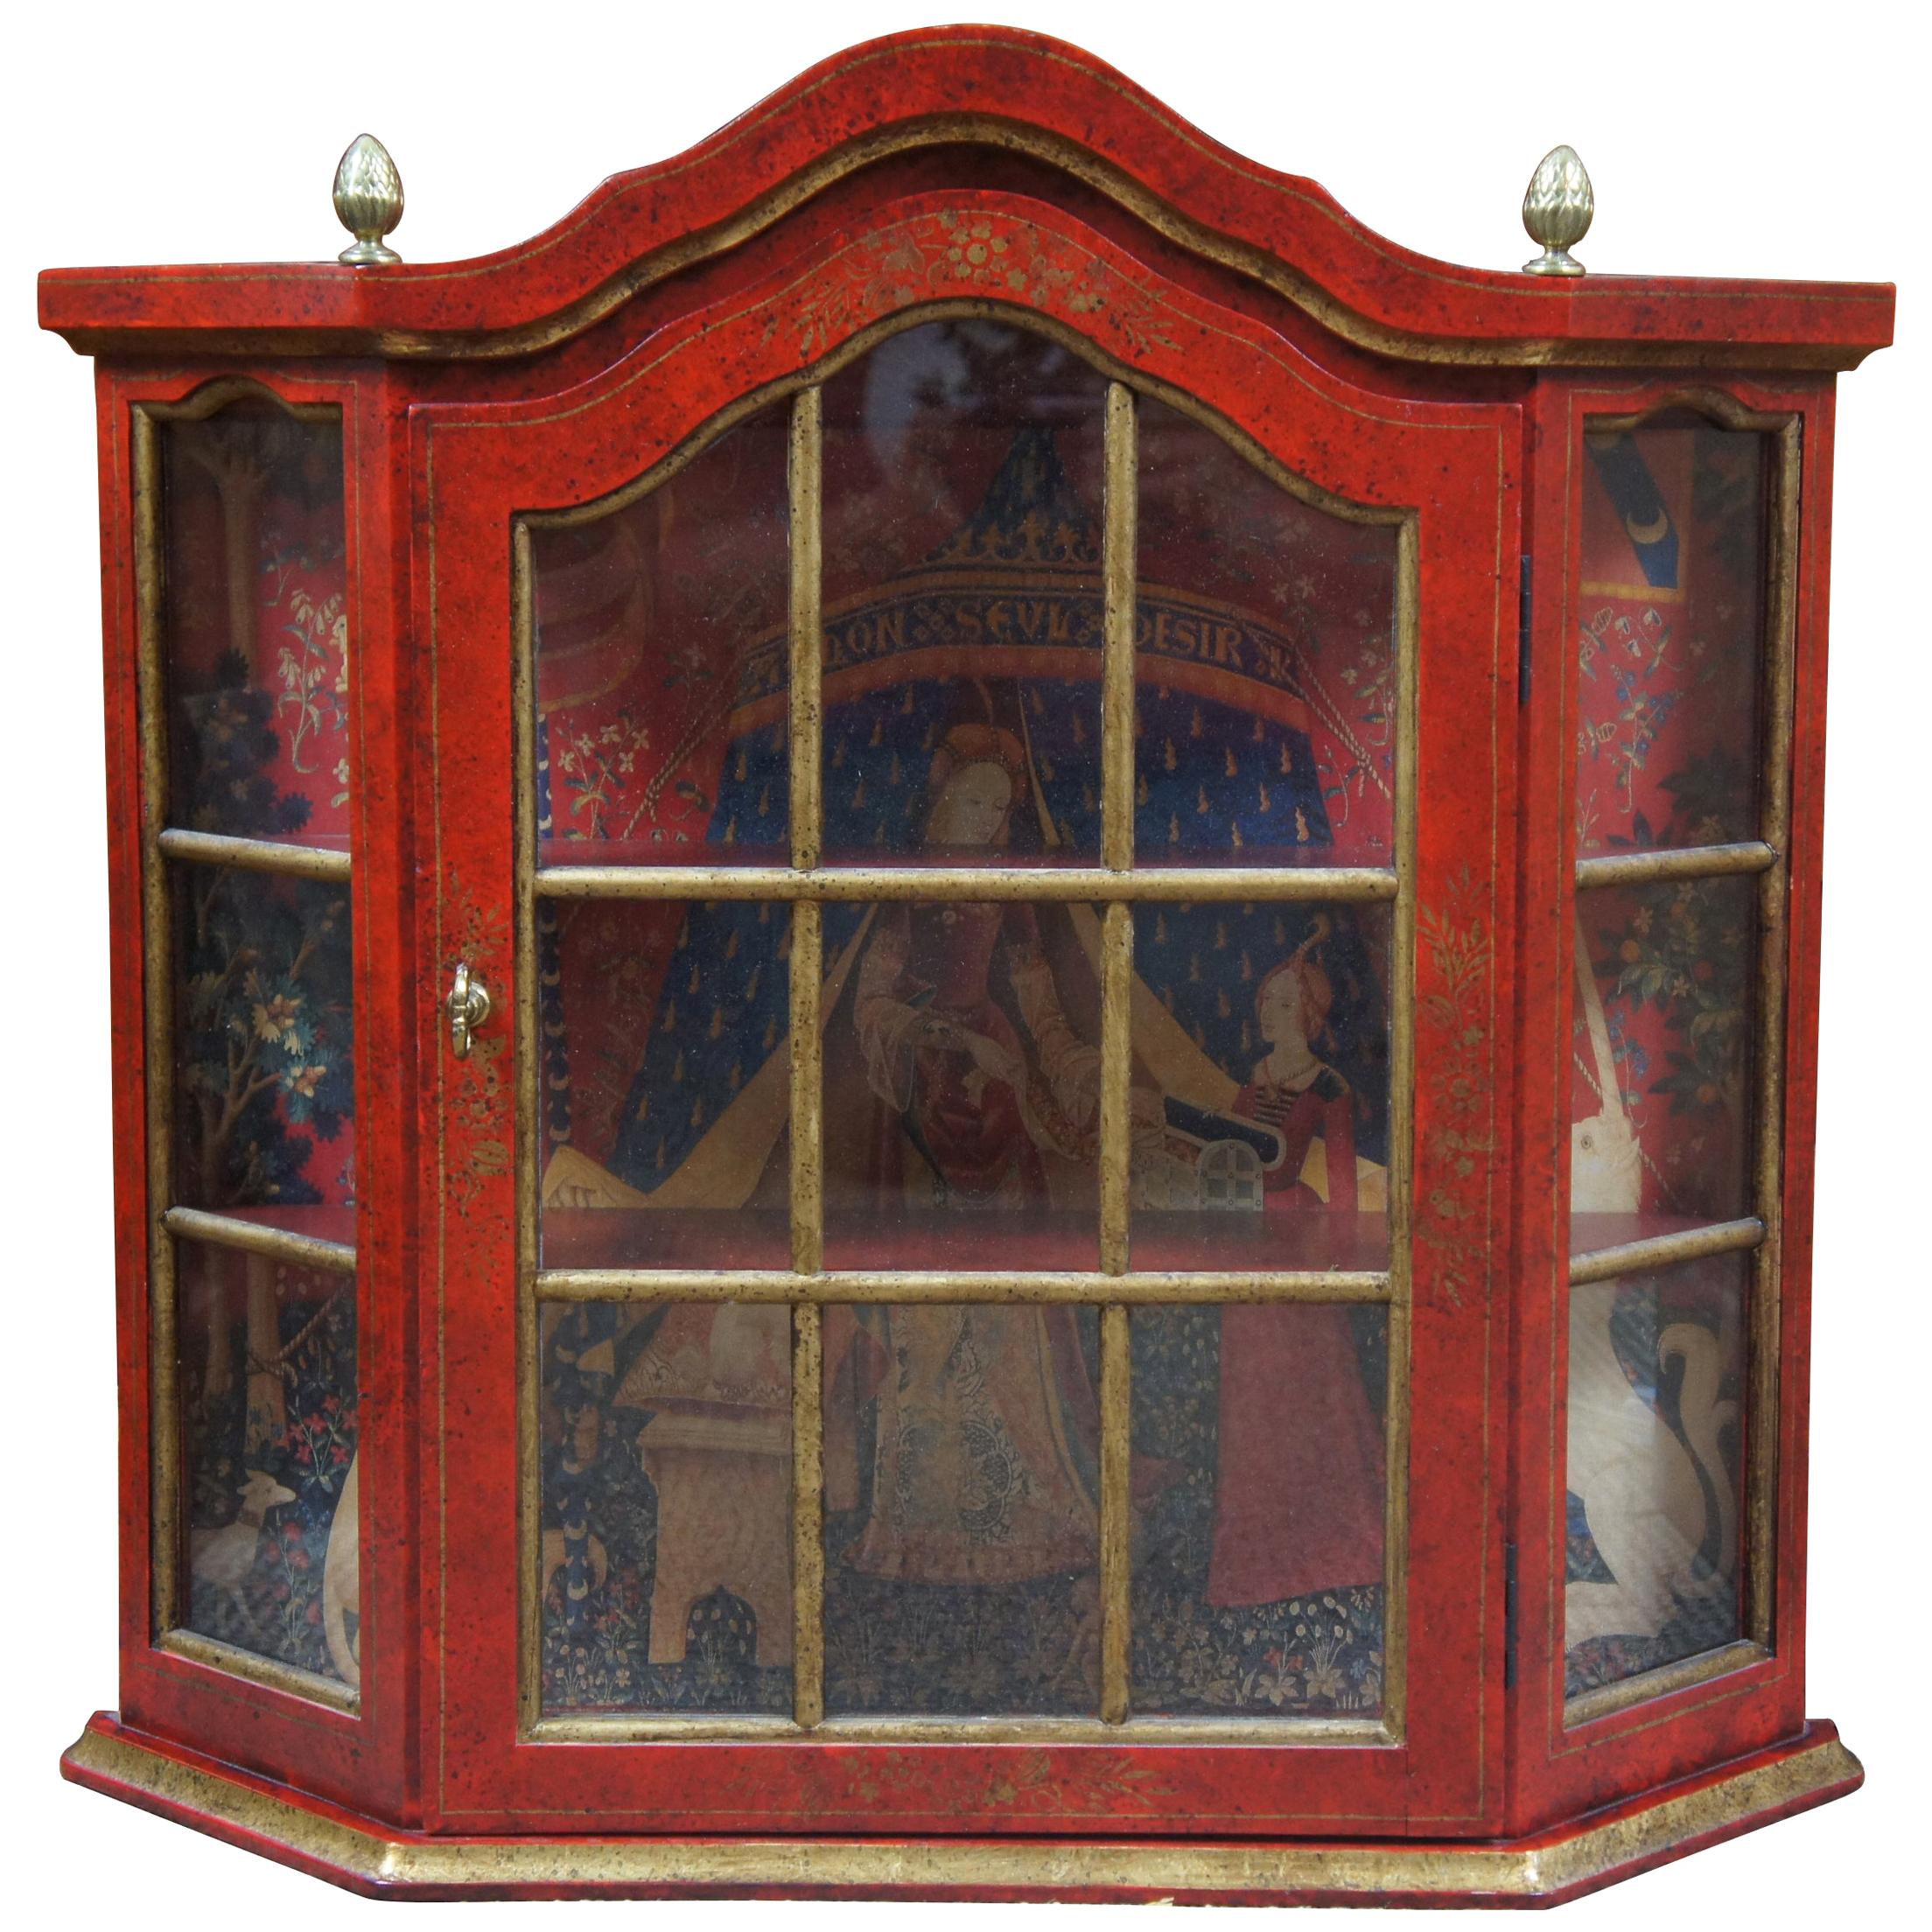 Vintage Red and Gold Distressed Wall Hanging Curio Cabinet Display Case Acorn